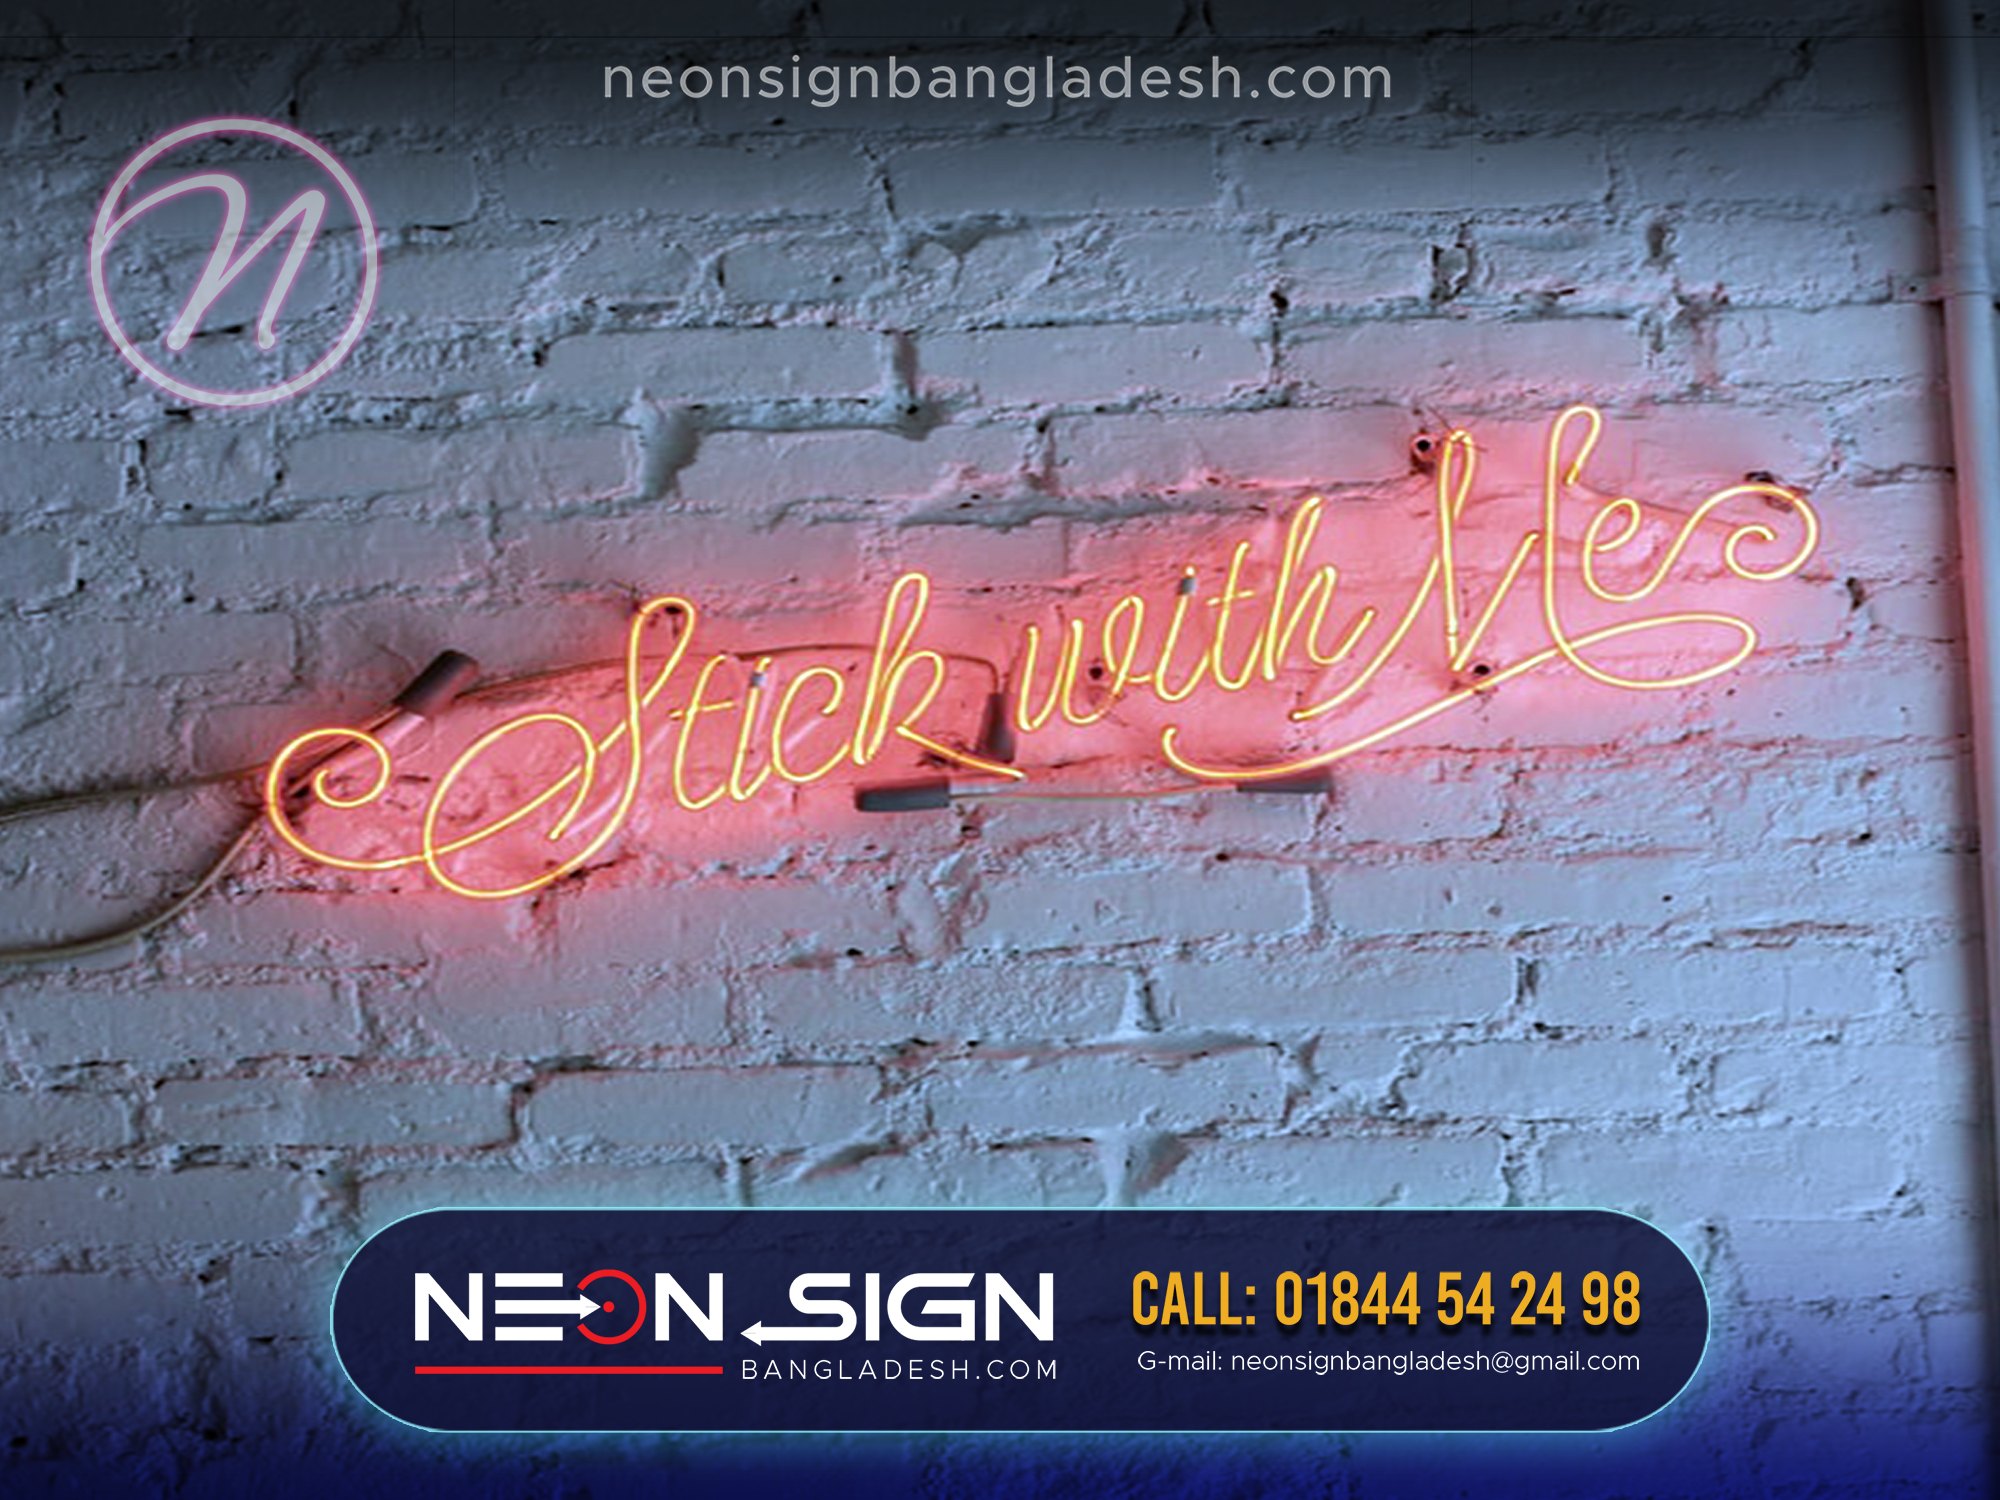 Led lighting neon signs for restaurant and shop price Led lighting neon signs for restaurant and shop near me Led lighting neon signs for restaurant and shop cost Led lighting neon signs for restaurant and shop cheap Led lighting neon signs for restaurant and shop amazon Custom led lighting neon signs for restaurant and shop Best led lighting neon signs for restaurant and shop led restaurant signs outdoor